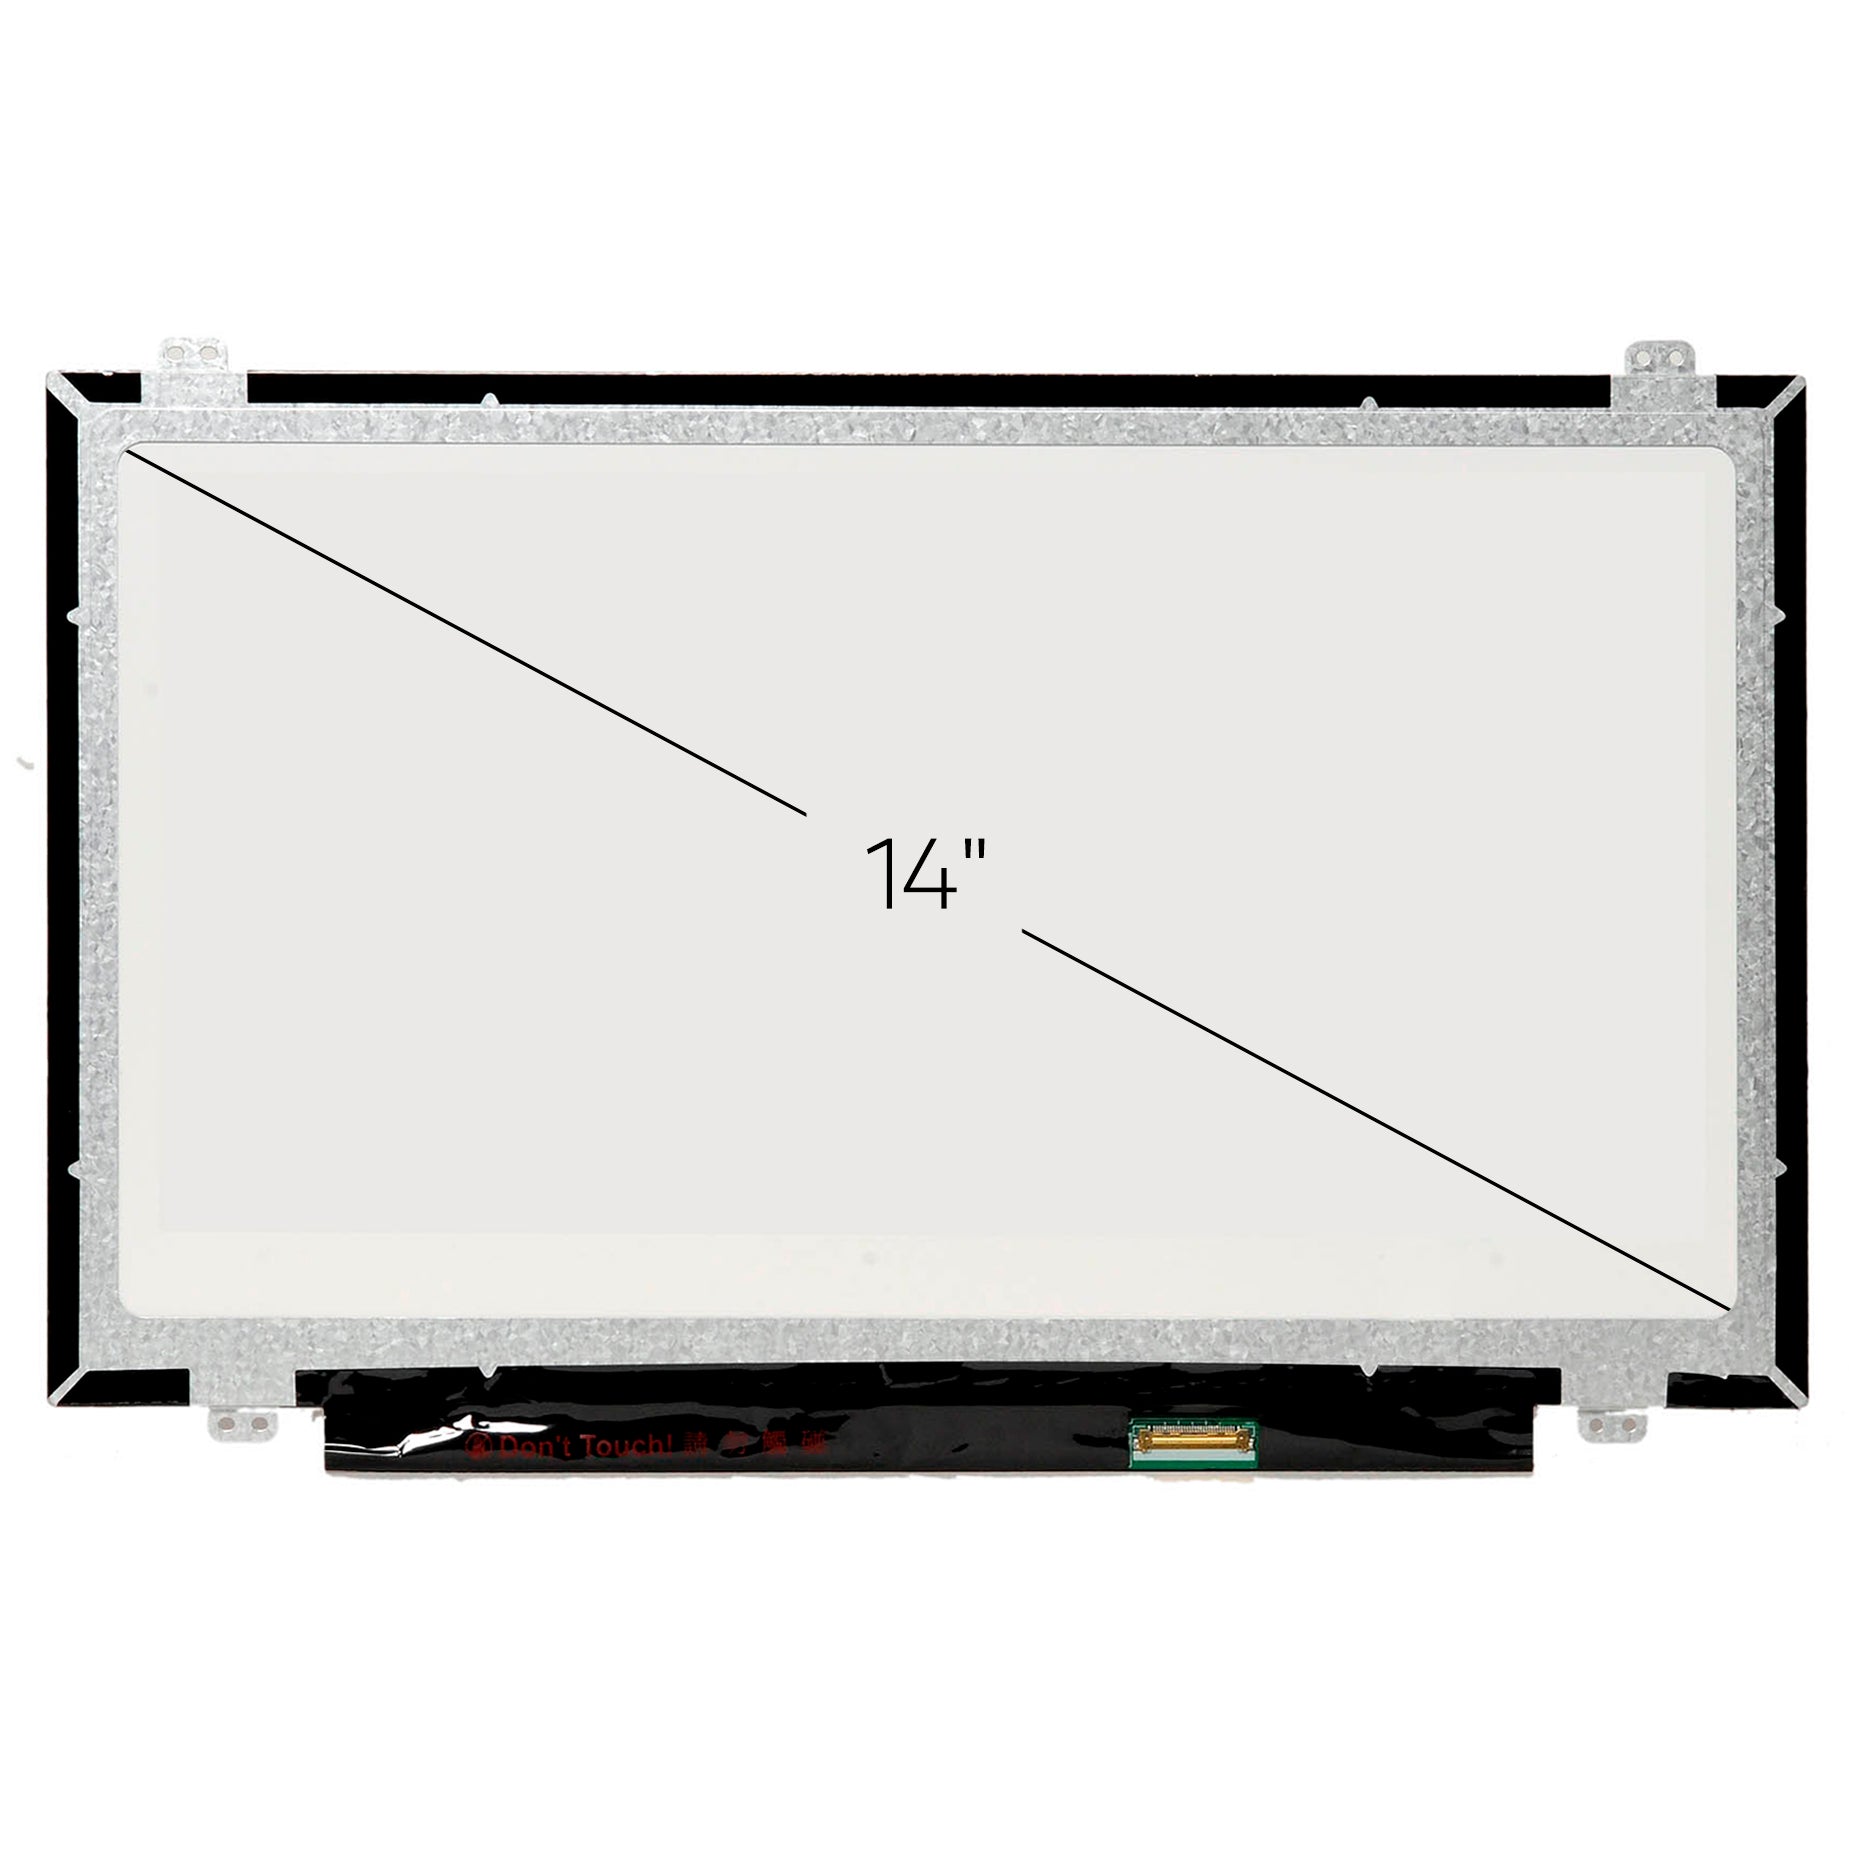 Screen Replacement for Lenovo Ideapad 100S-14IBR HD 1366x768 Glossy LCD LED Display